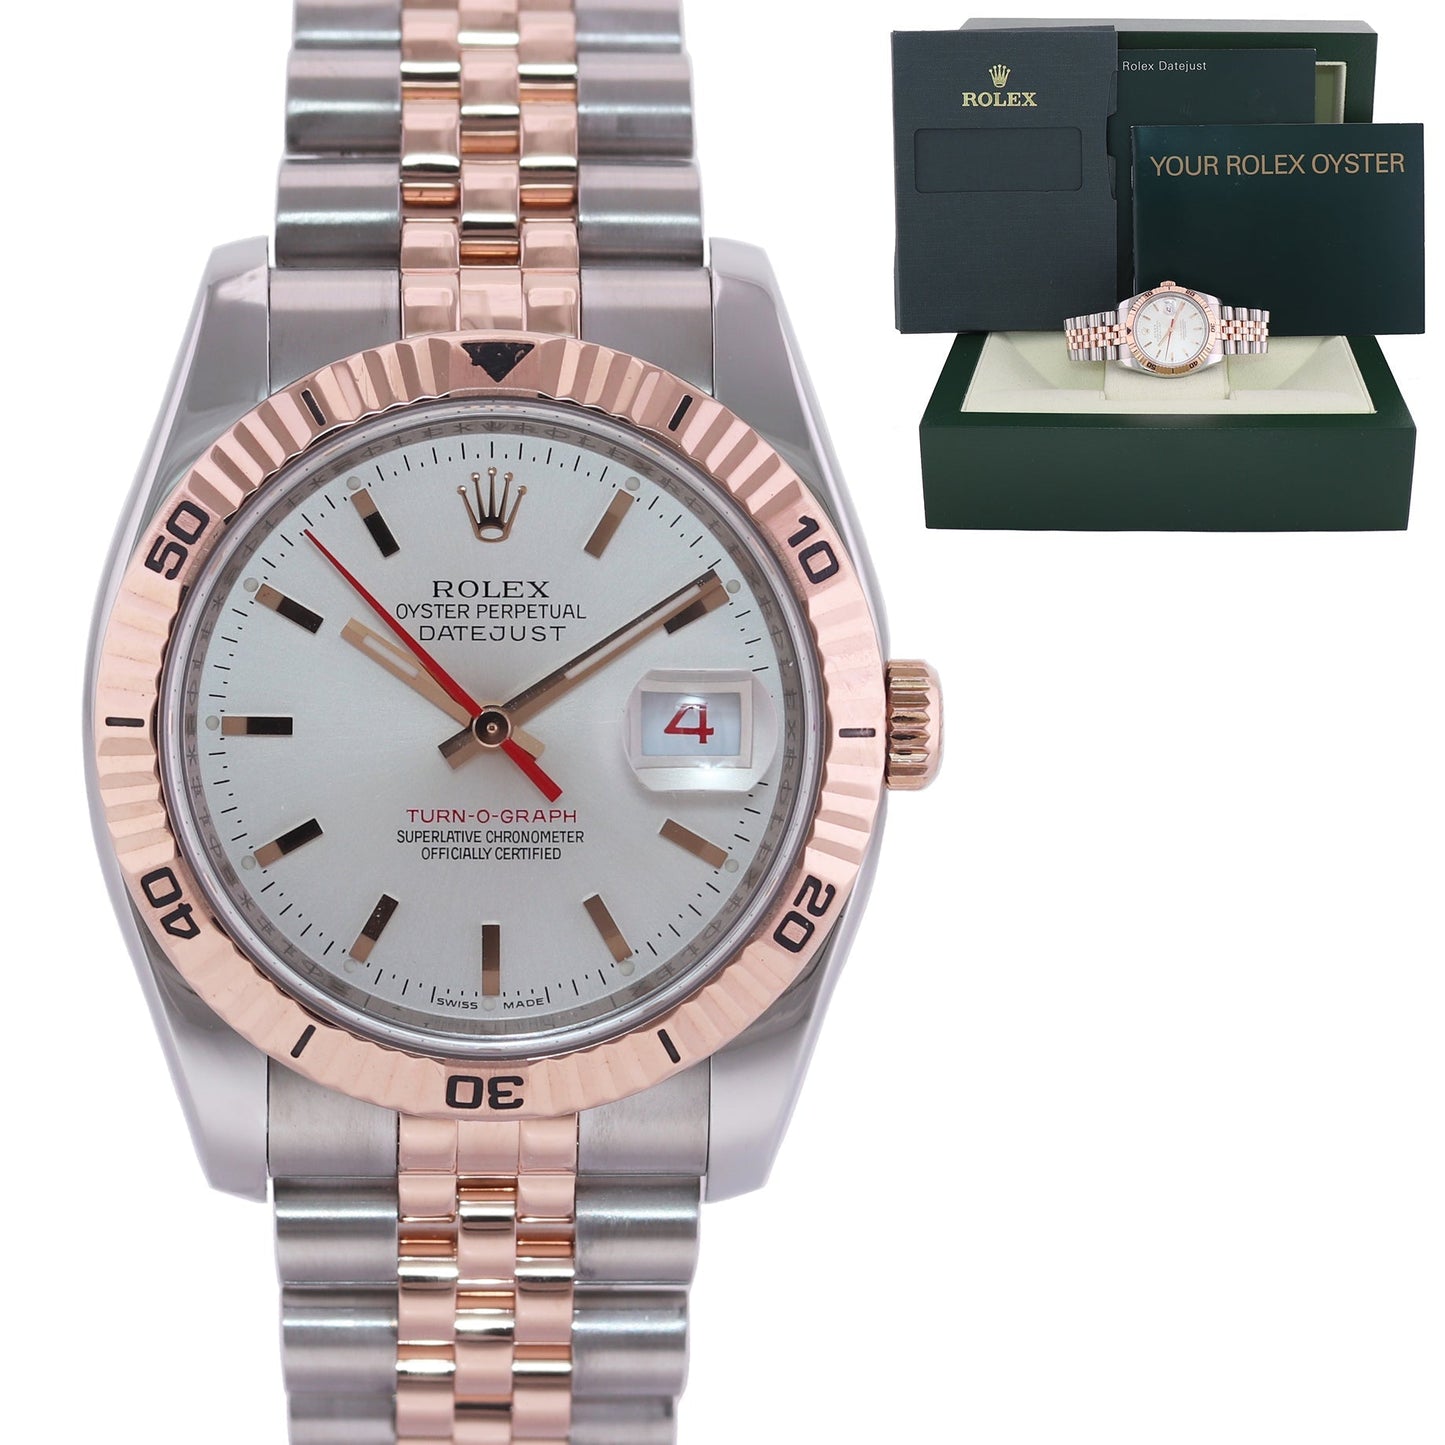 MINT 2005 Rolex DateJust Turn-O-Graph 116261 Rose Gold Two Tone Steel White Watch